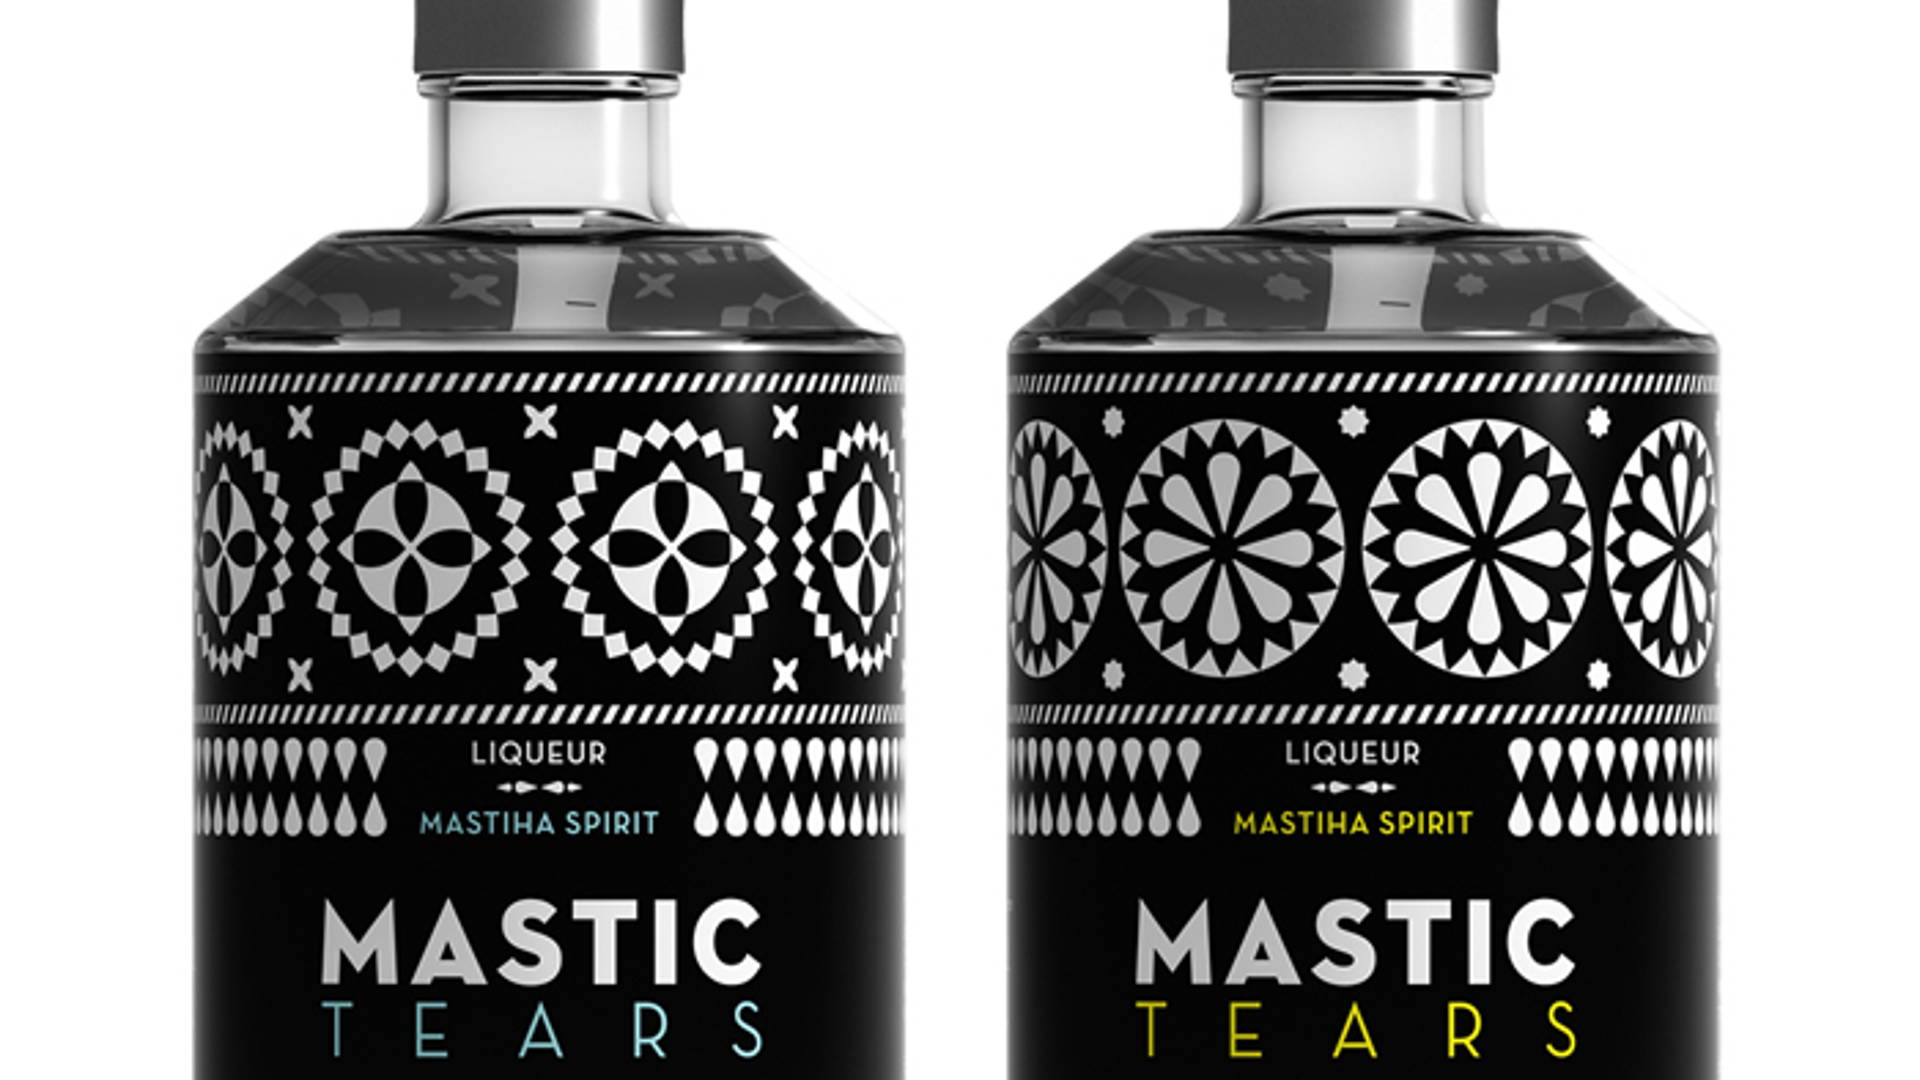 Featured image for Mastic Tears Liqueur